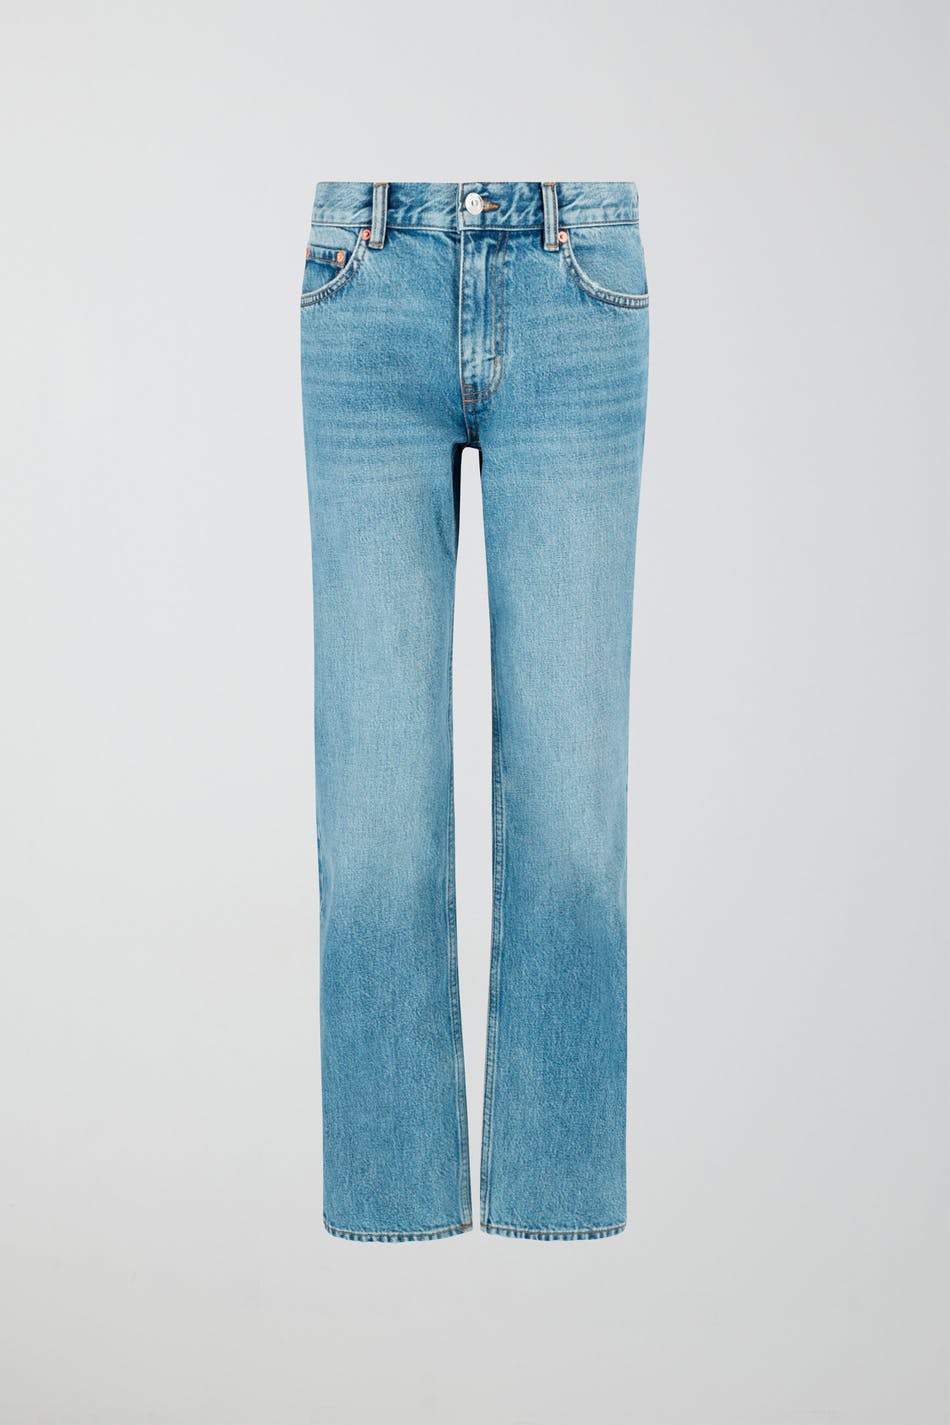 Low straight tall jeans - Gina Tricot -  - Blue - 44 - Female